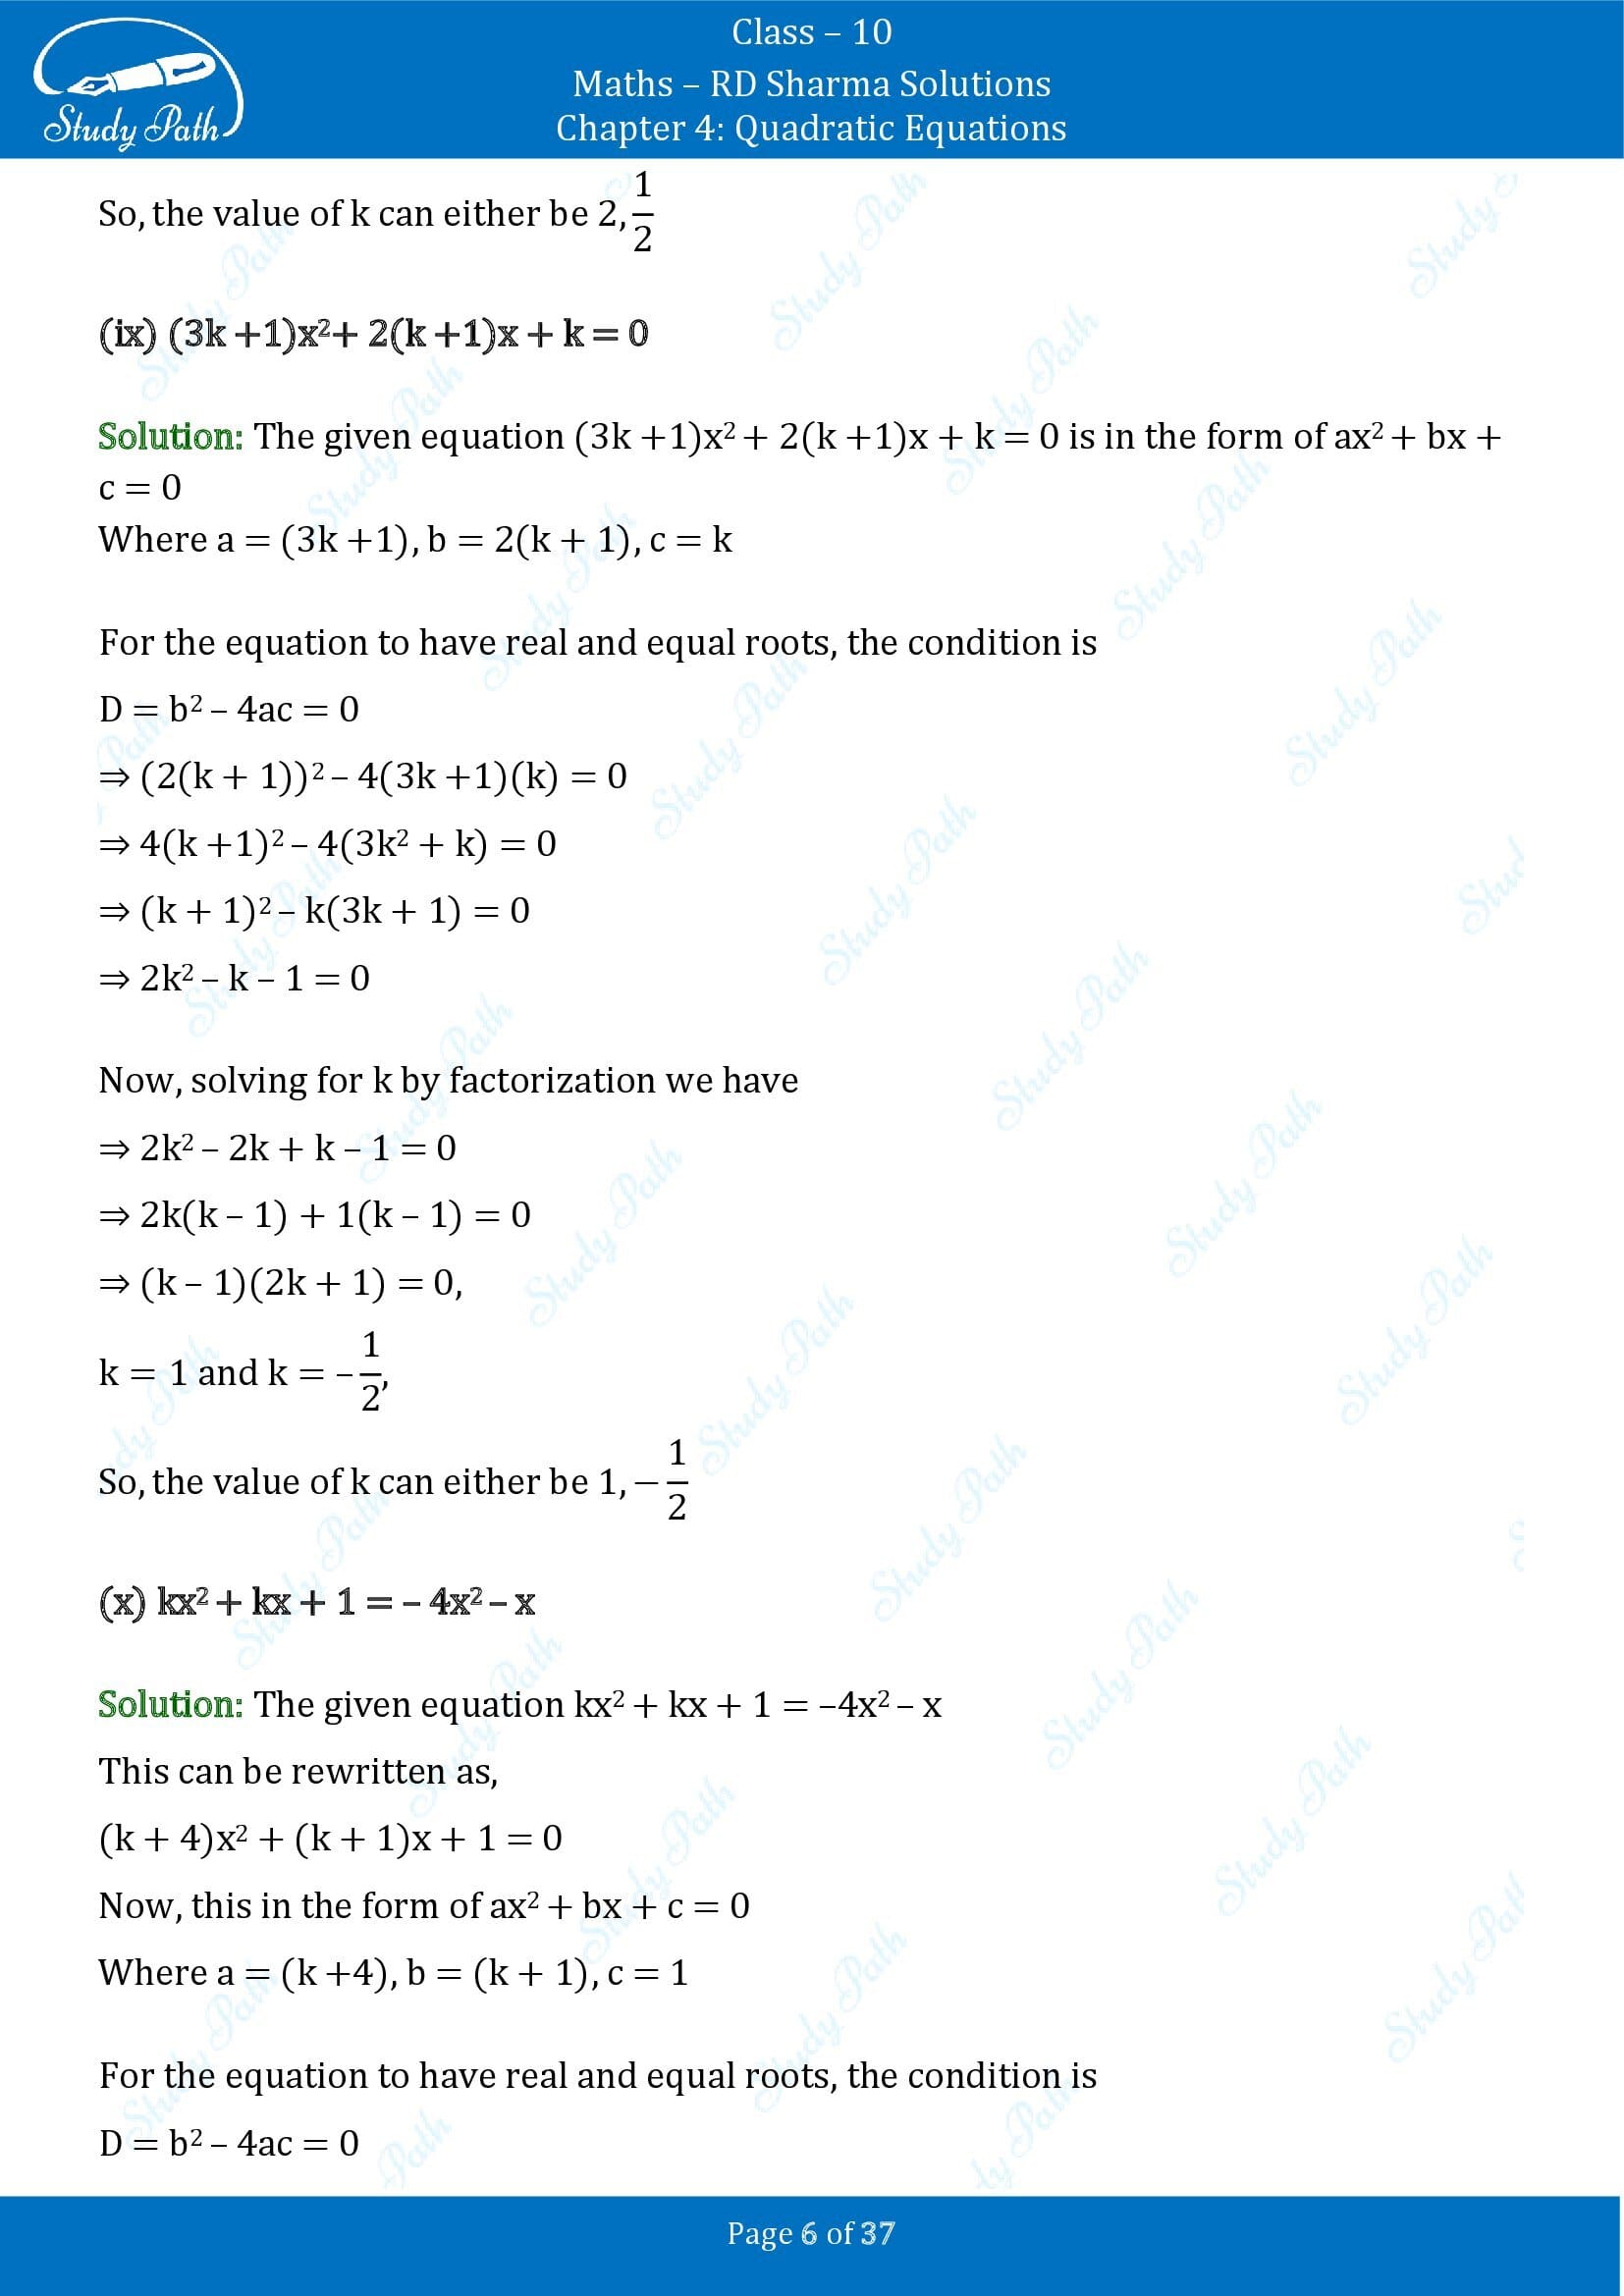 RD Sharma Solutions Class 10 Chapter 4 Quadratic Equations Exercise 4.6 00006